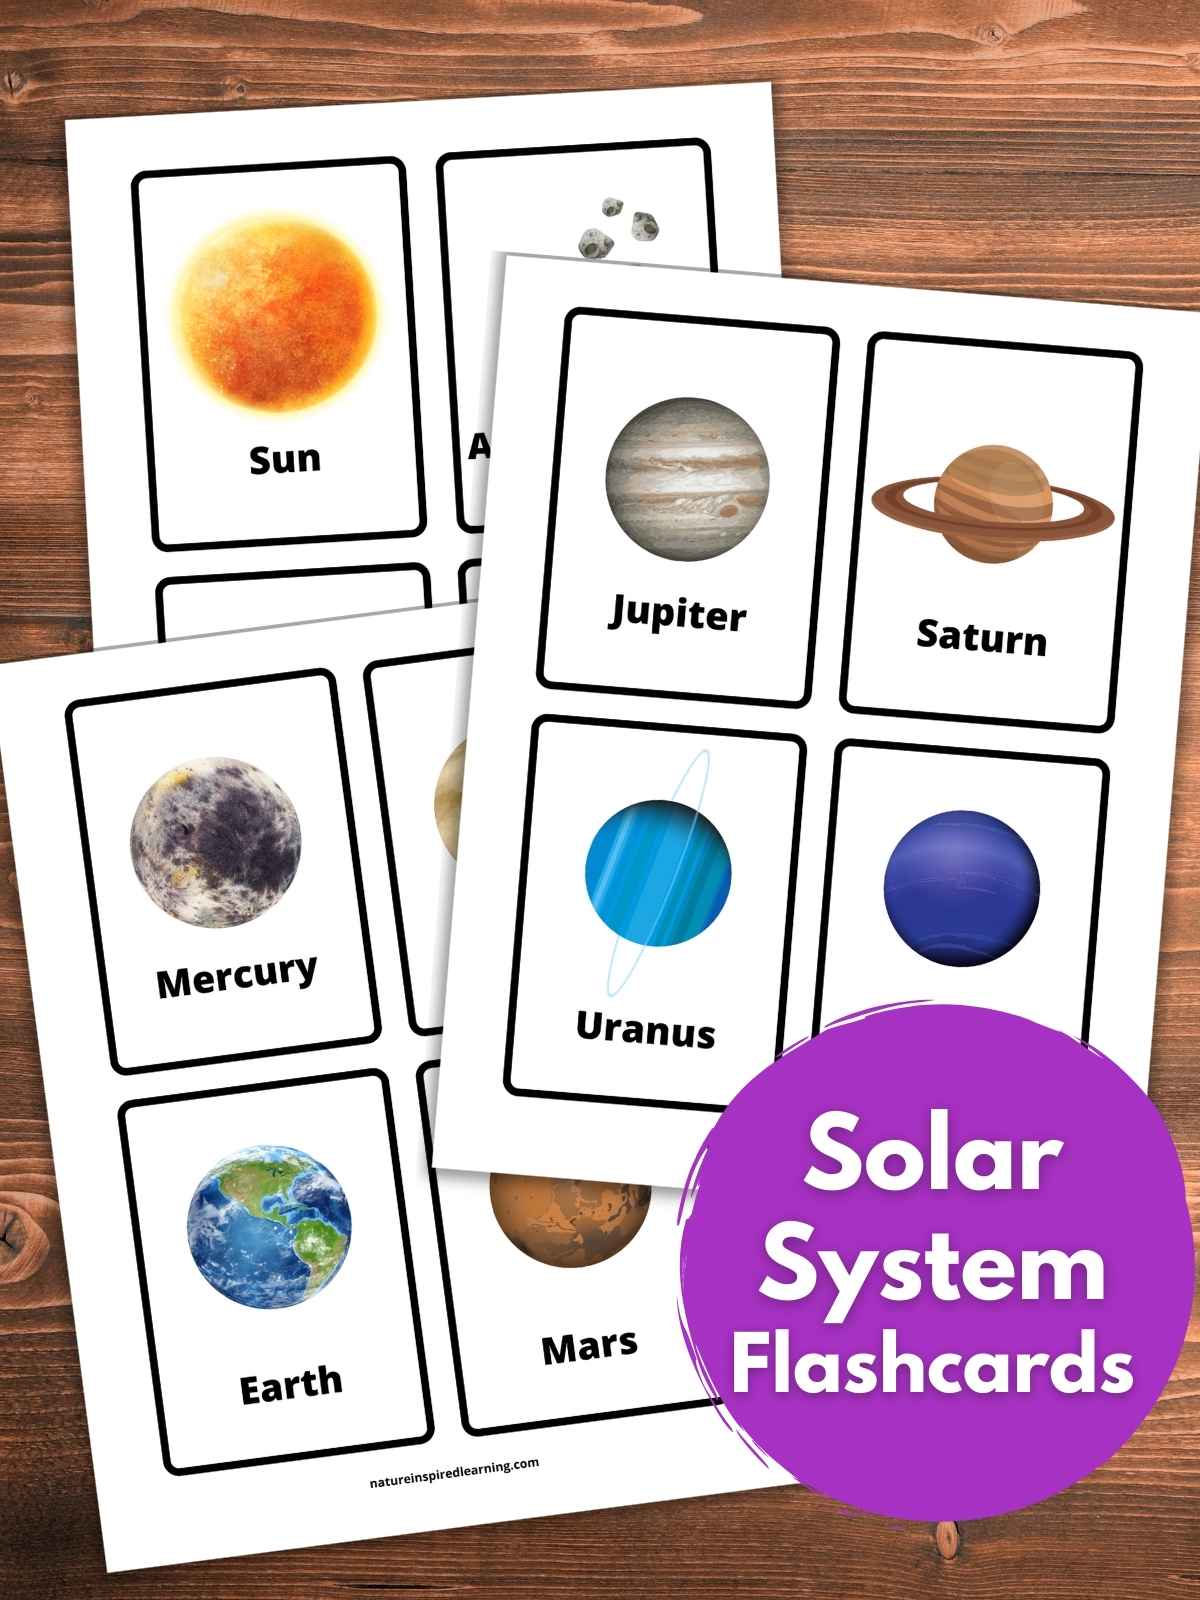 Four printed out sheets with flashcards with planets and objects in our solar system. Colorful realistic image of each planet and object with a label below in black text. Printables on a wooden background with purple circle bottom right with text overlay.